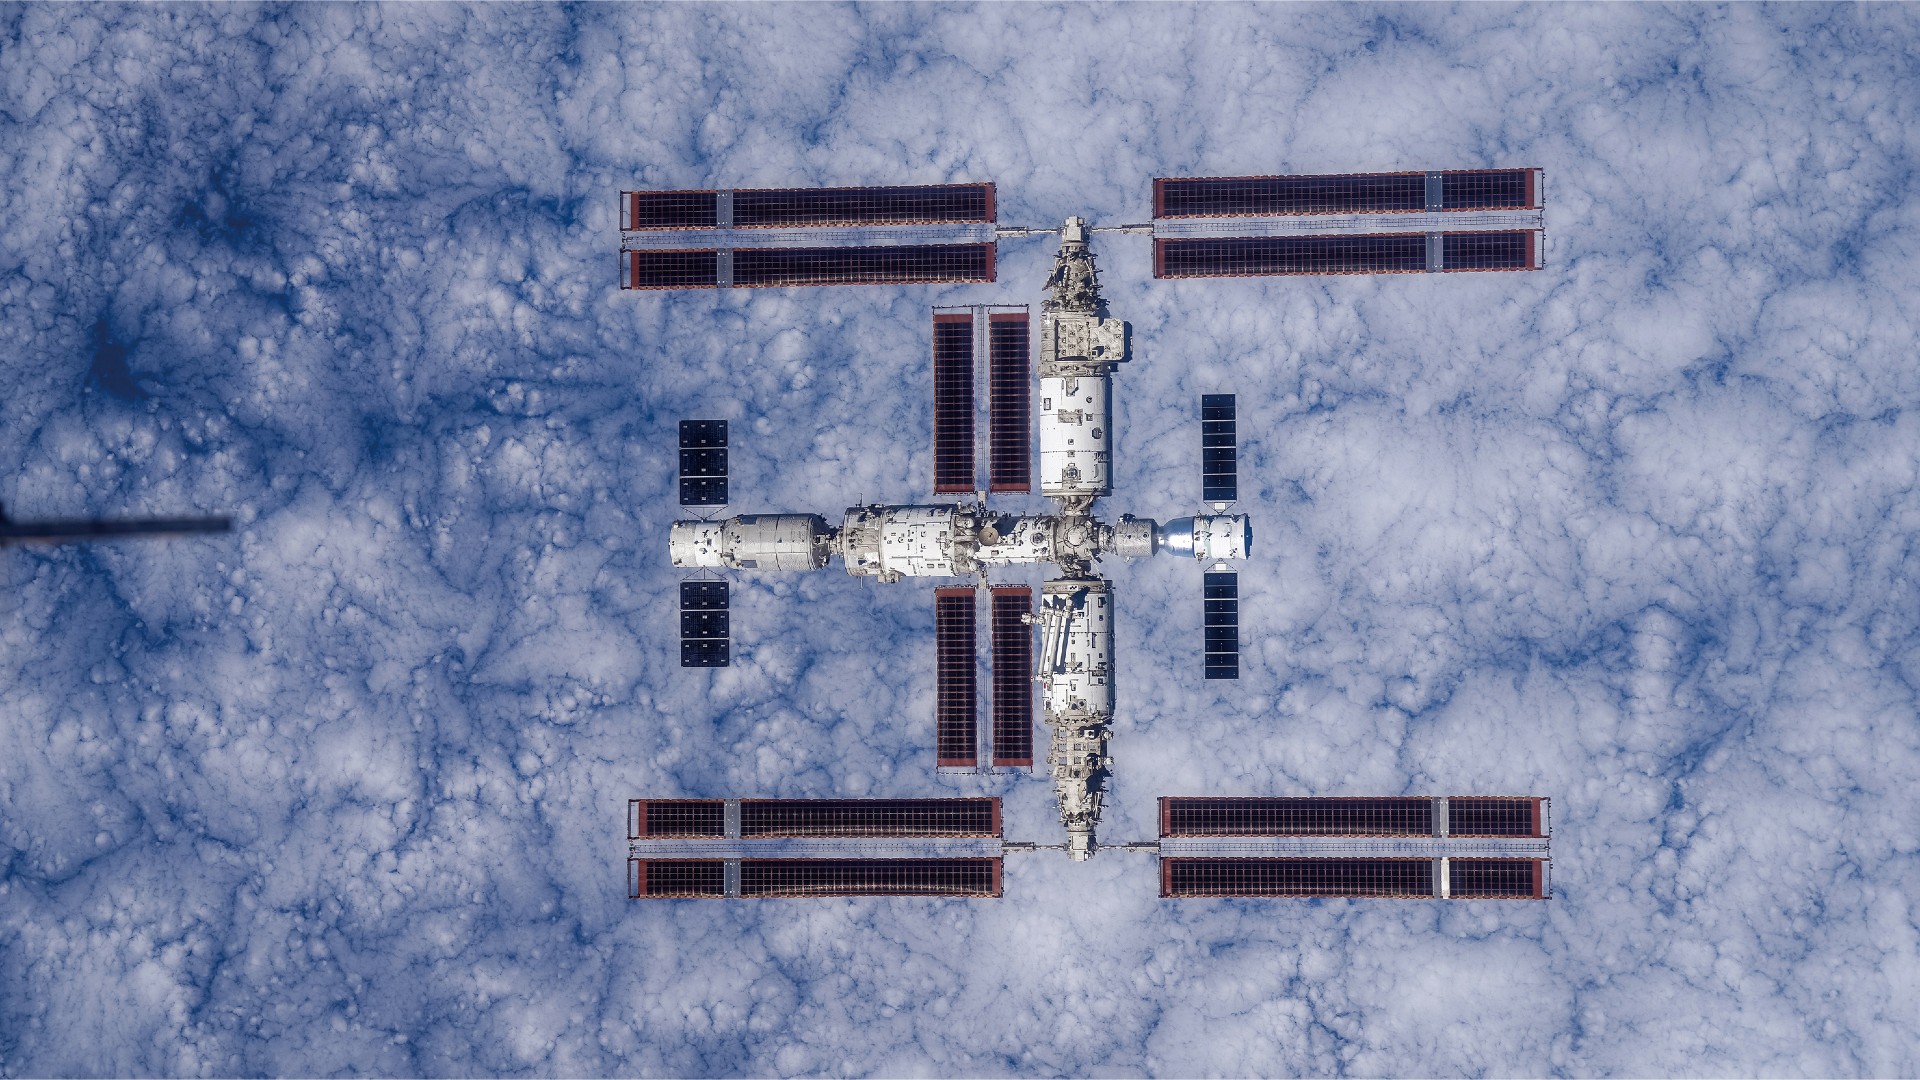  US space science could fall behind China if private successors to ISS are delayed, Congress warns 